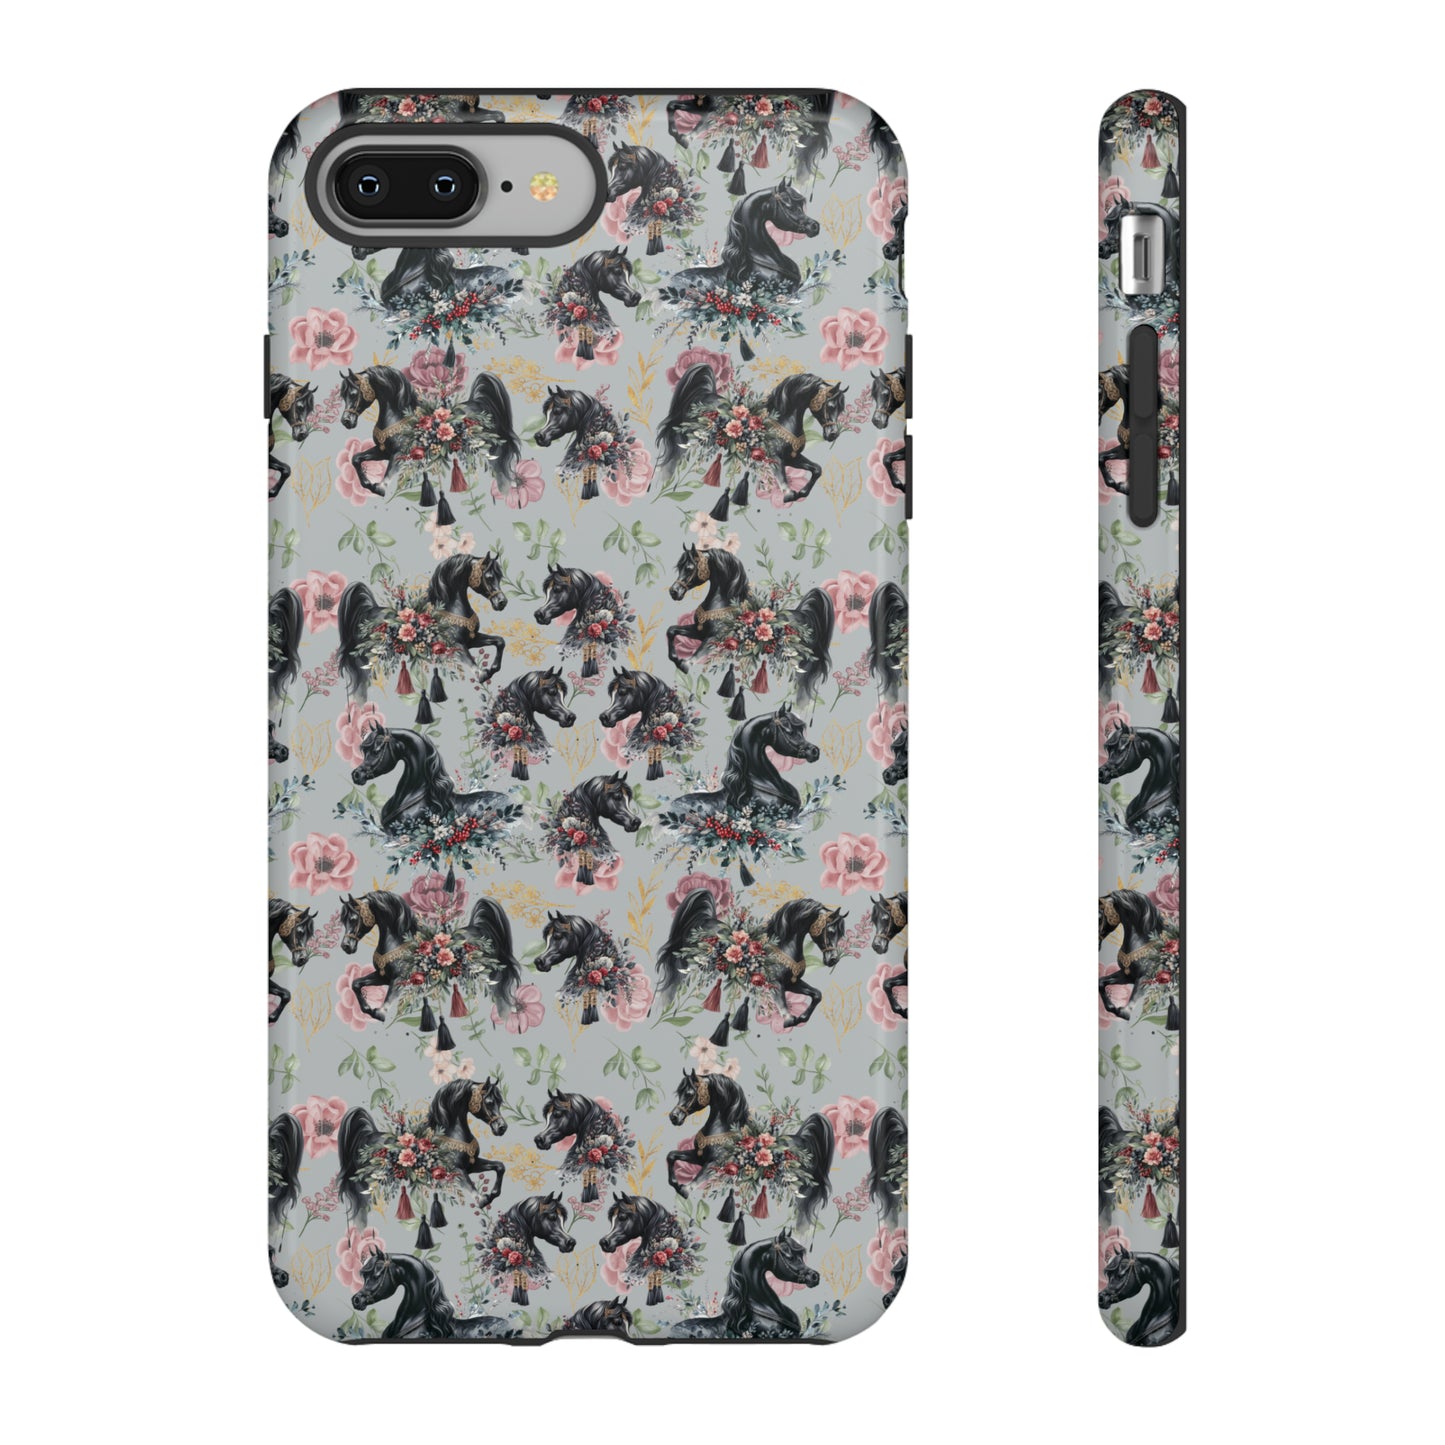 Horse Phone Case Arabian Horse phone case, cases for most all modern phone models, Iphone, Samsung, Pixel Horse art Gift for horse lover